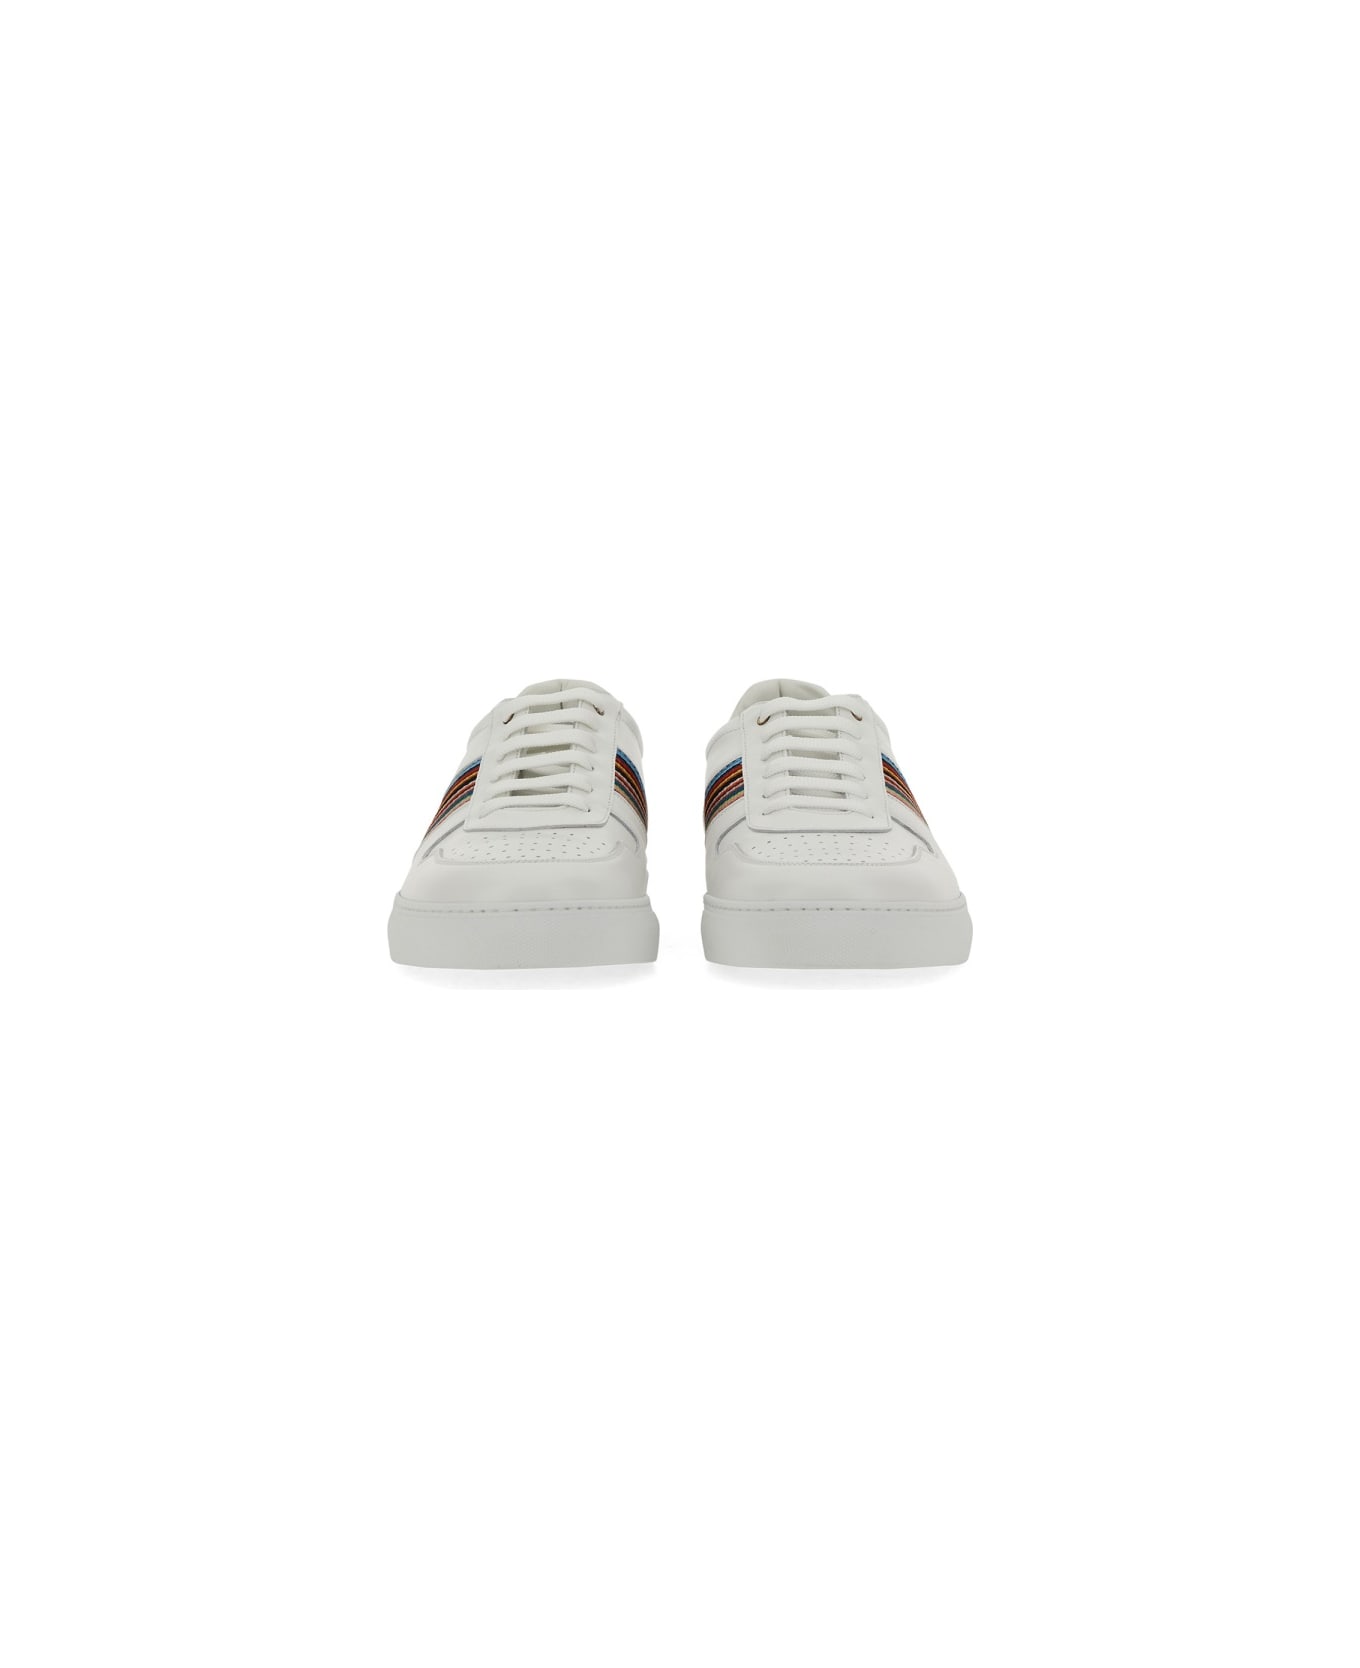 Paul Smith Leather Sneaker - WHITE